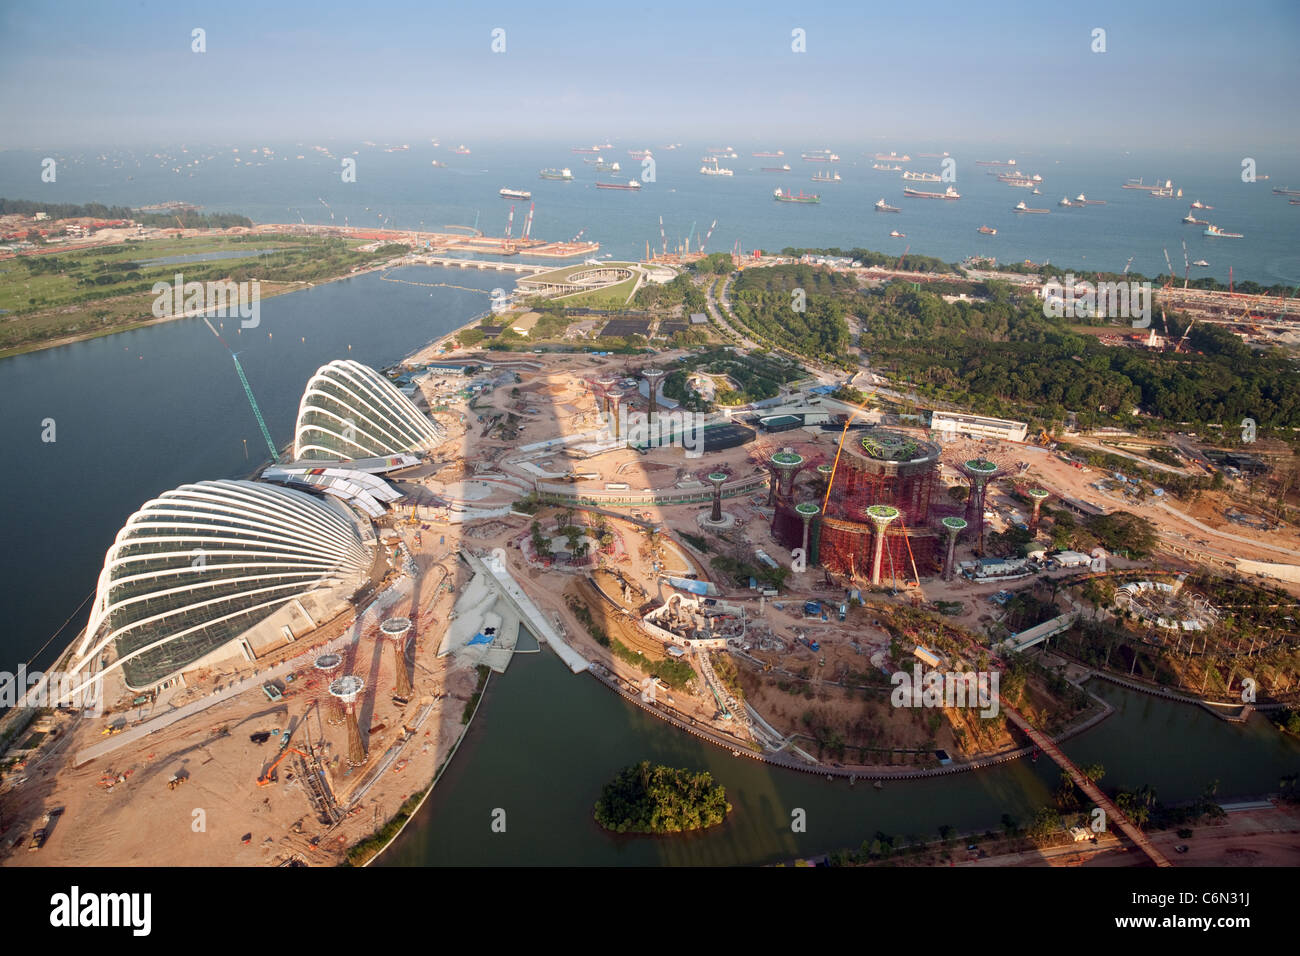 Land reclamation and new building in Singapore seen from the top of the Marina Bay Hotel (shadow of the hotel on the land) Stock Photo